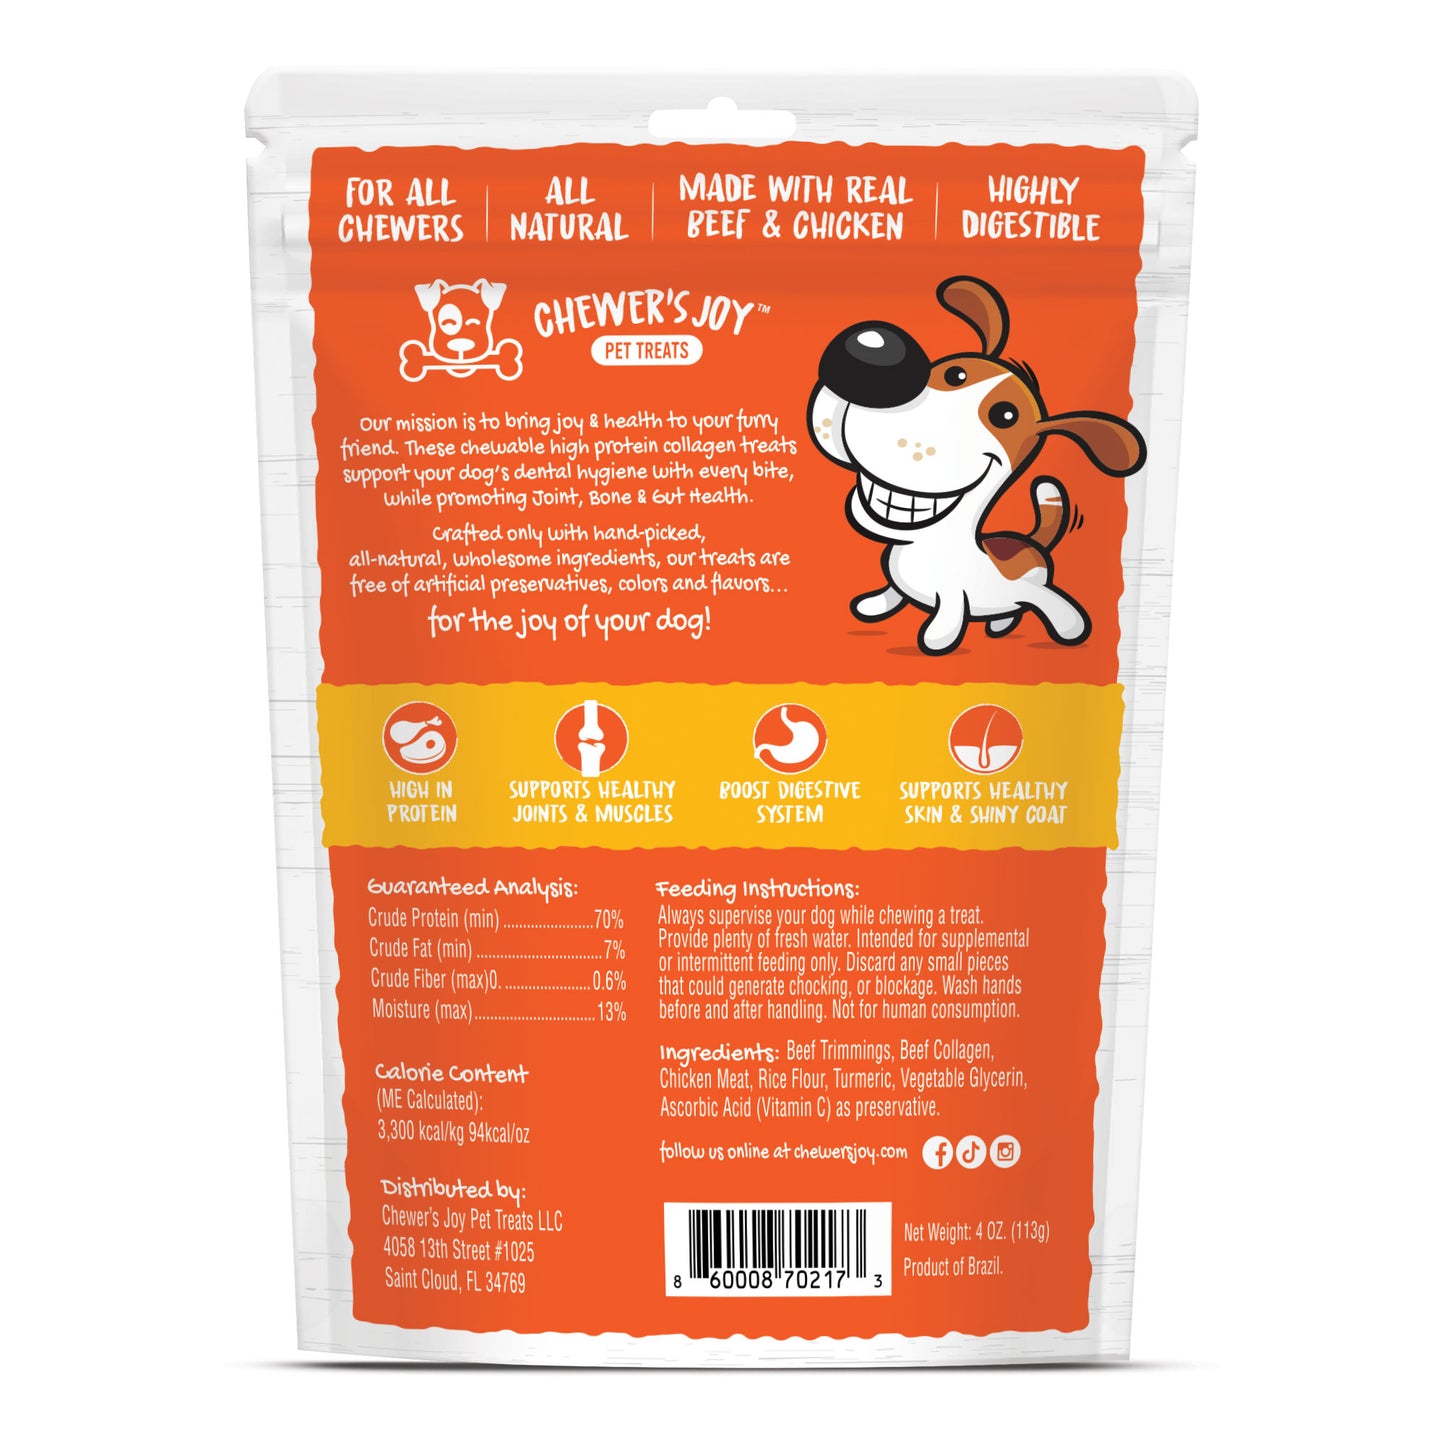 Chewer's Joy Roll'a Joint dog treats with collagen, turmeric, real beef and chicken meat, vitamin c guaranteed analysis